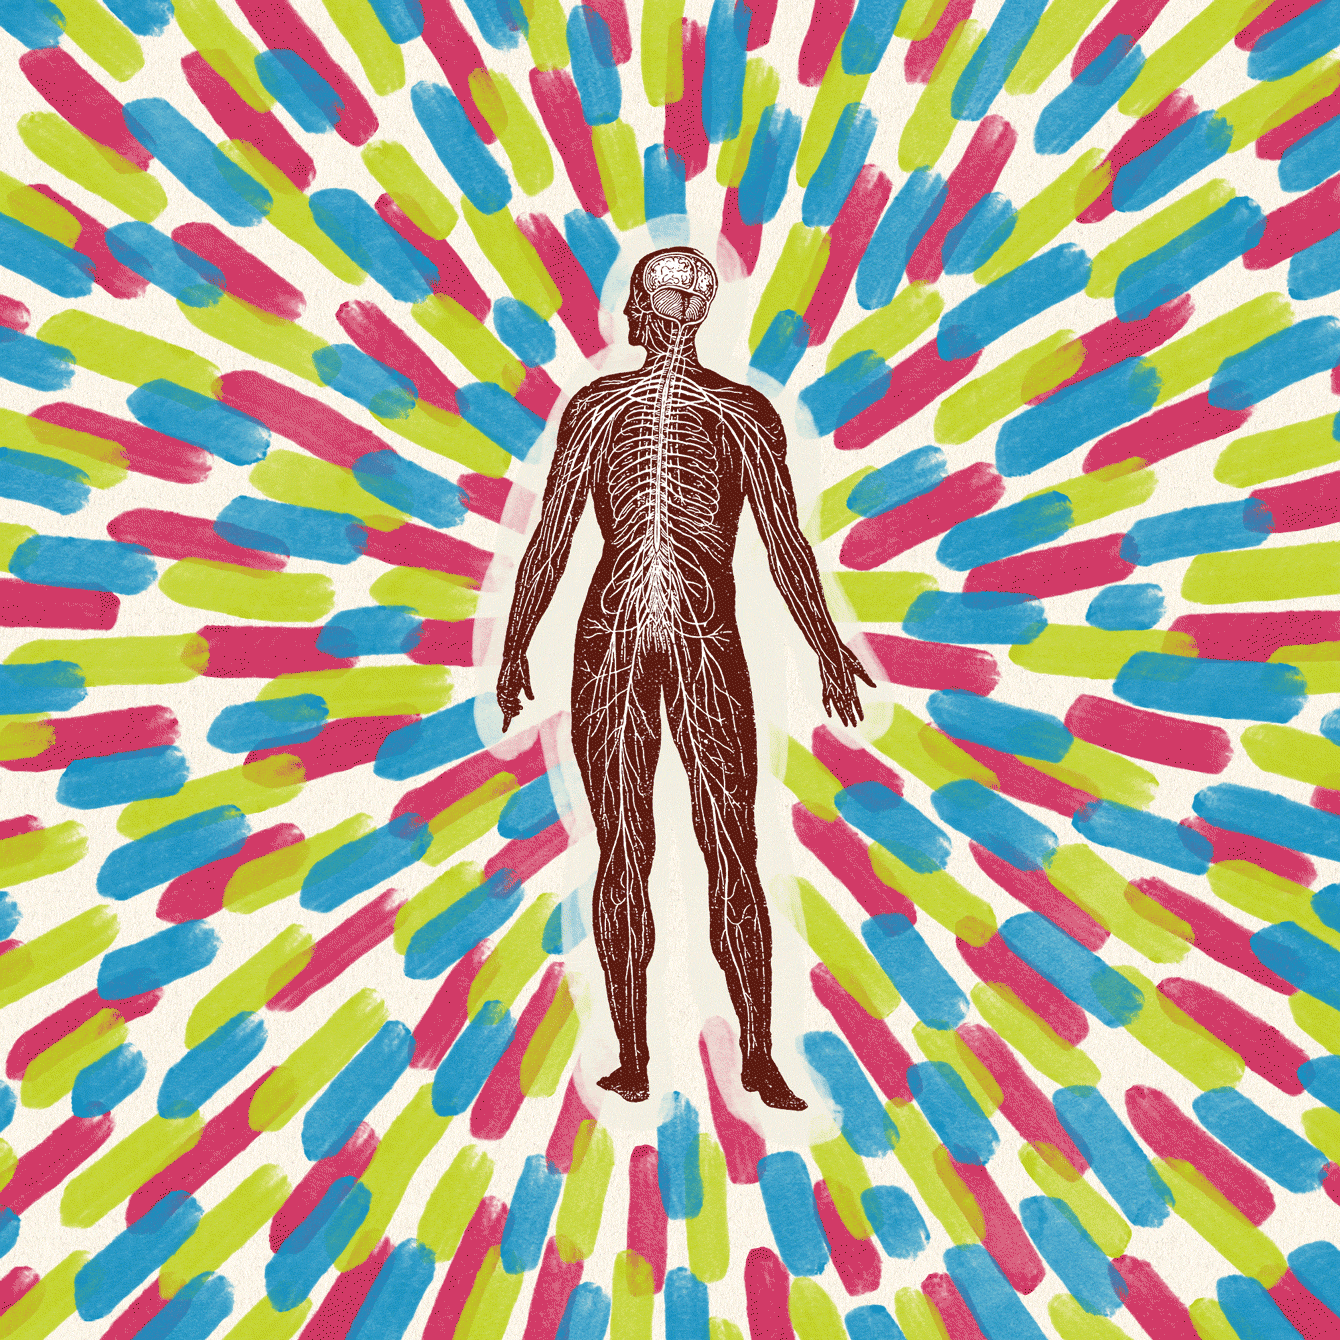 animated illustration of color dashes radiating from anatomy human figure showing nervous system